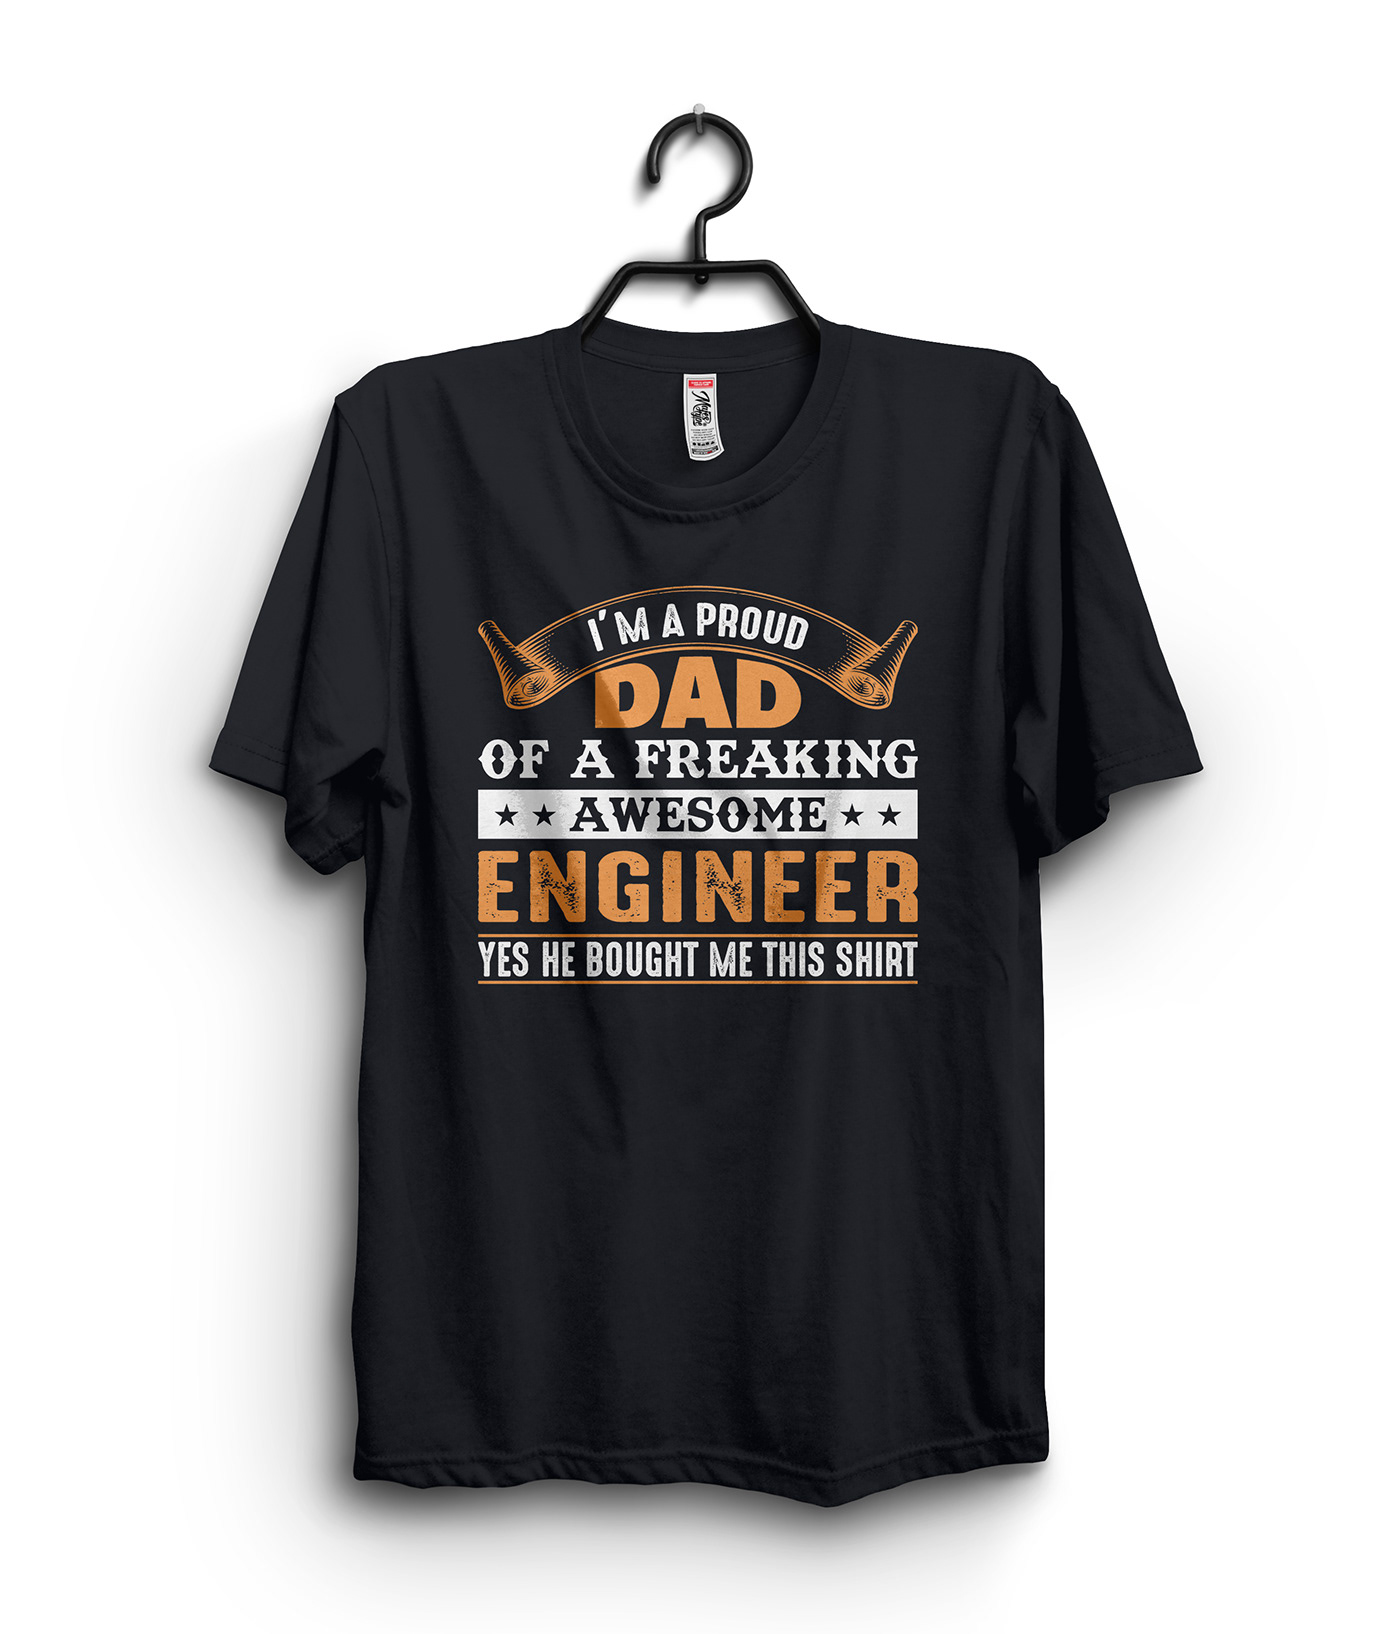 Buddle t-shirts custom t-shirt Engineer T-Shirts engineering design mearch by amazon t-shirts